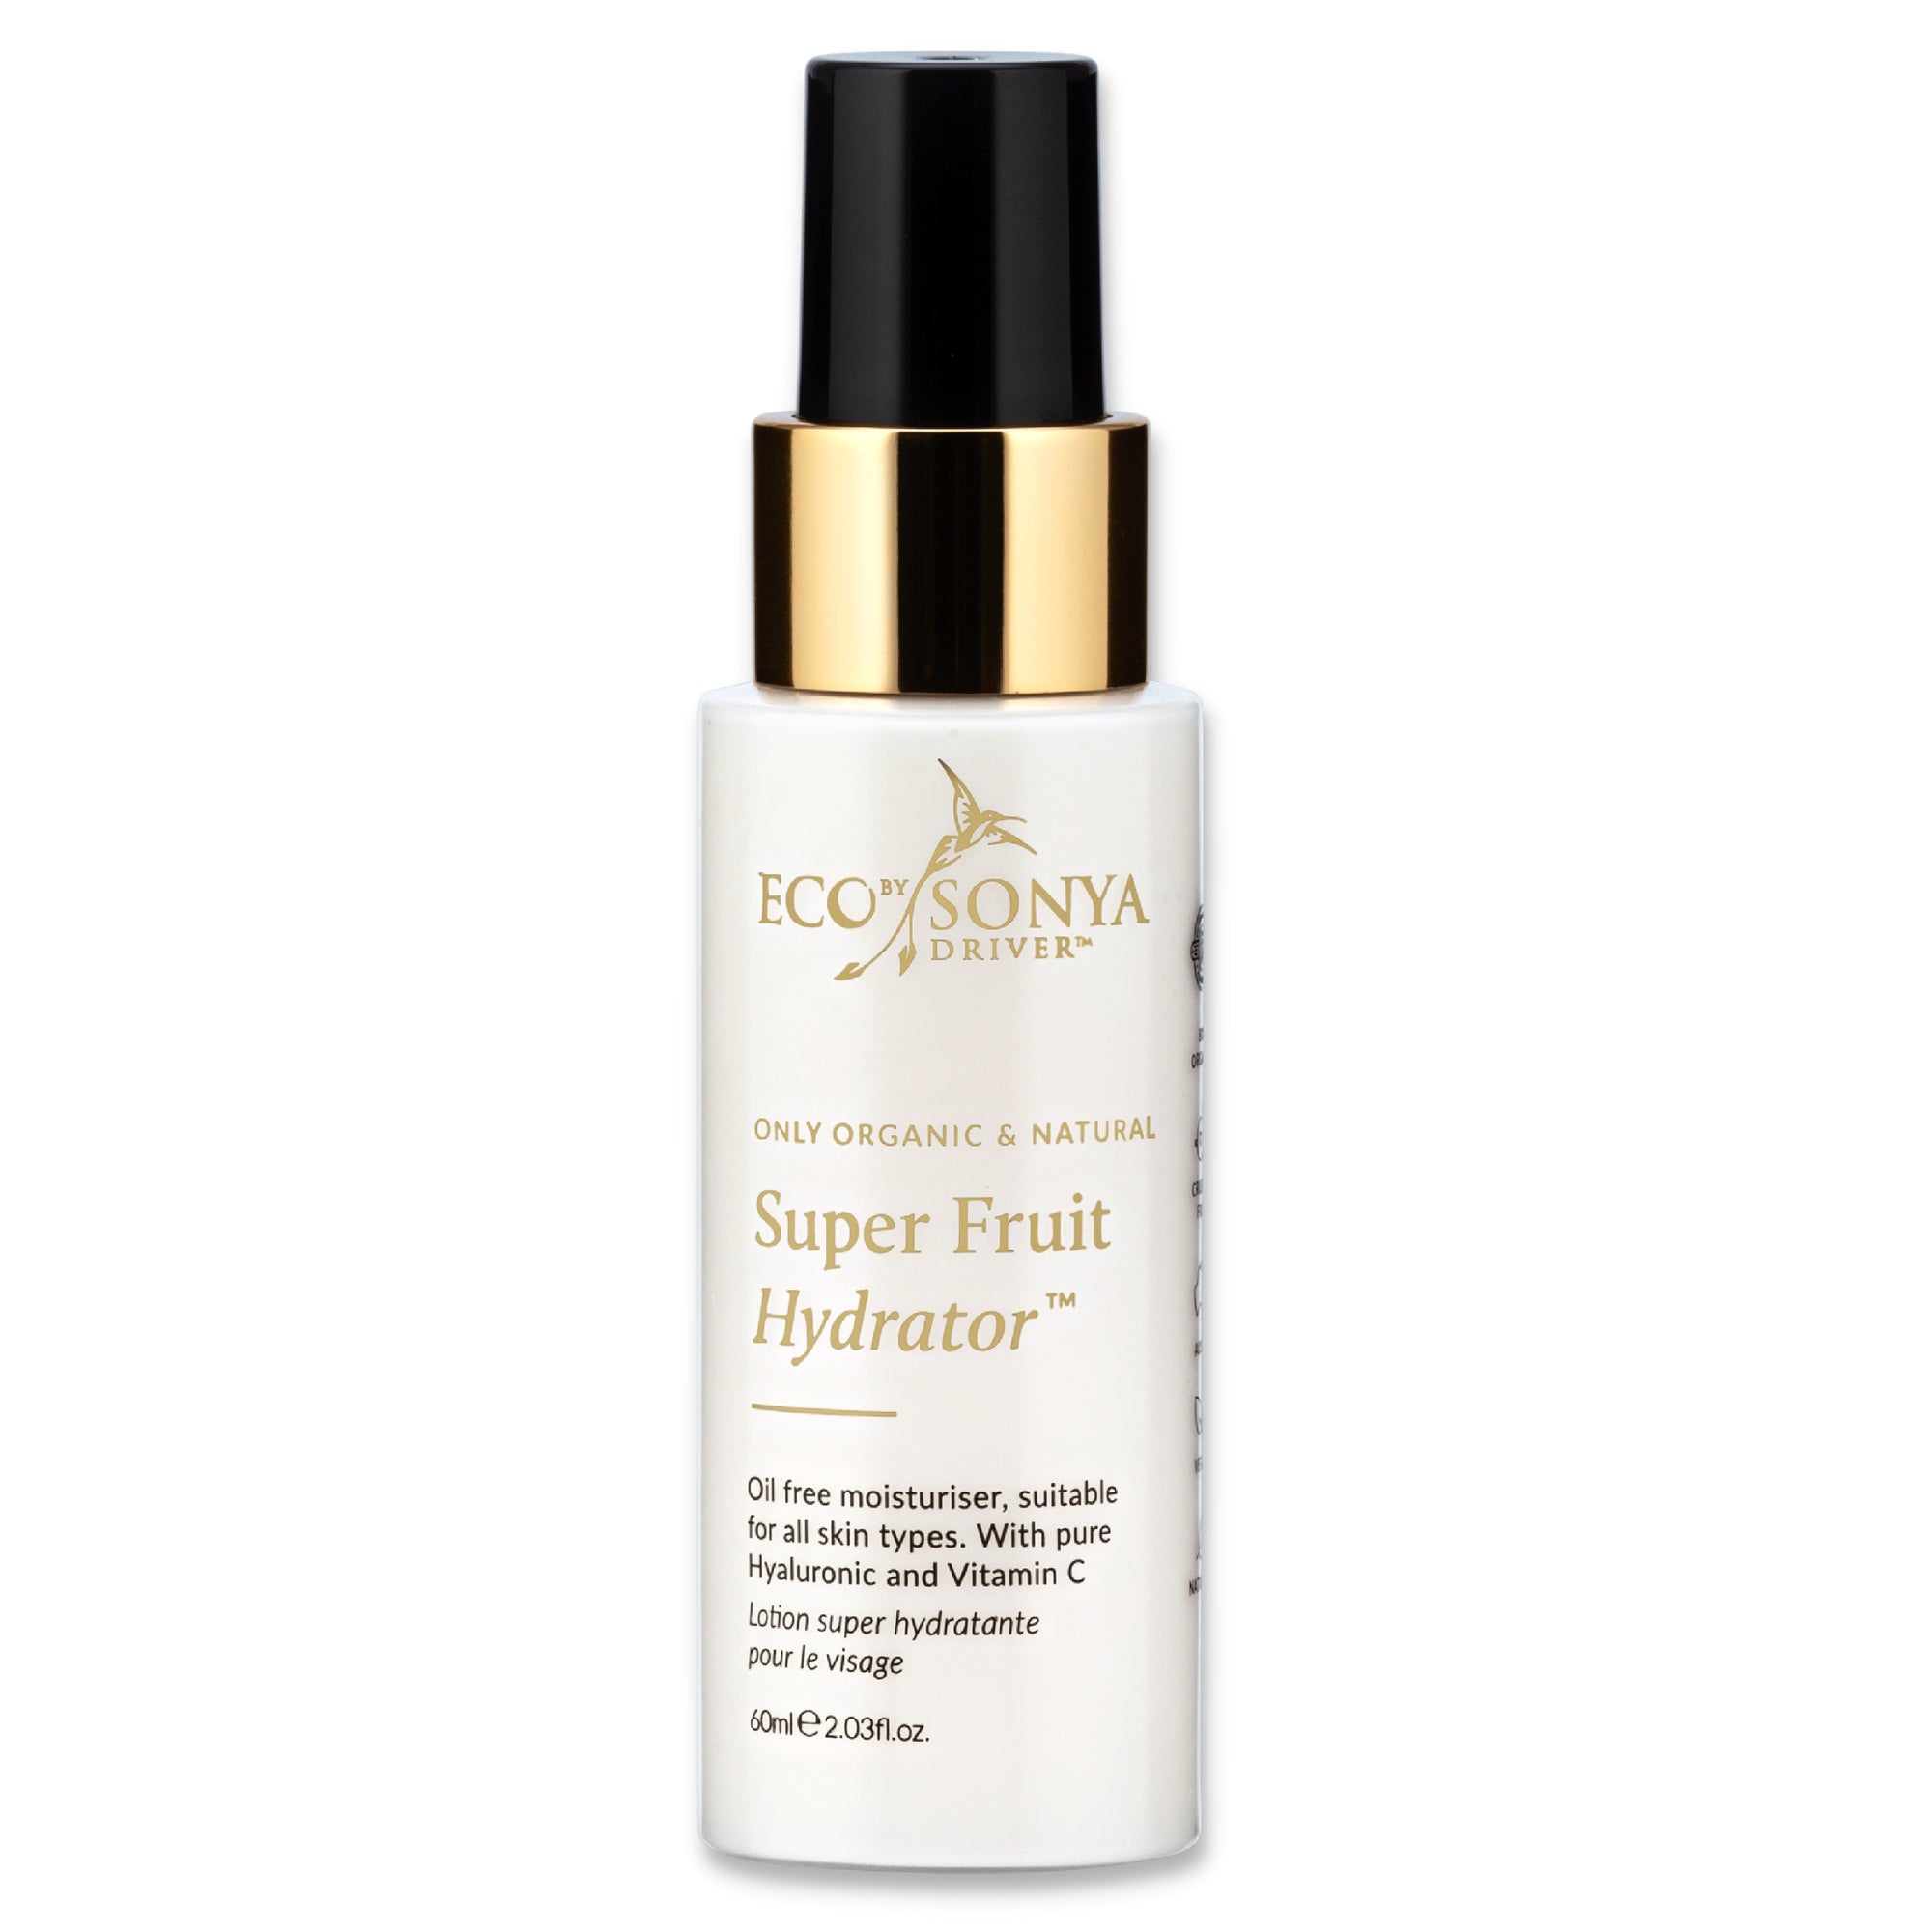 Eco by Sonya Driver Super Fruit Hydrator